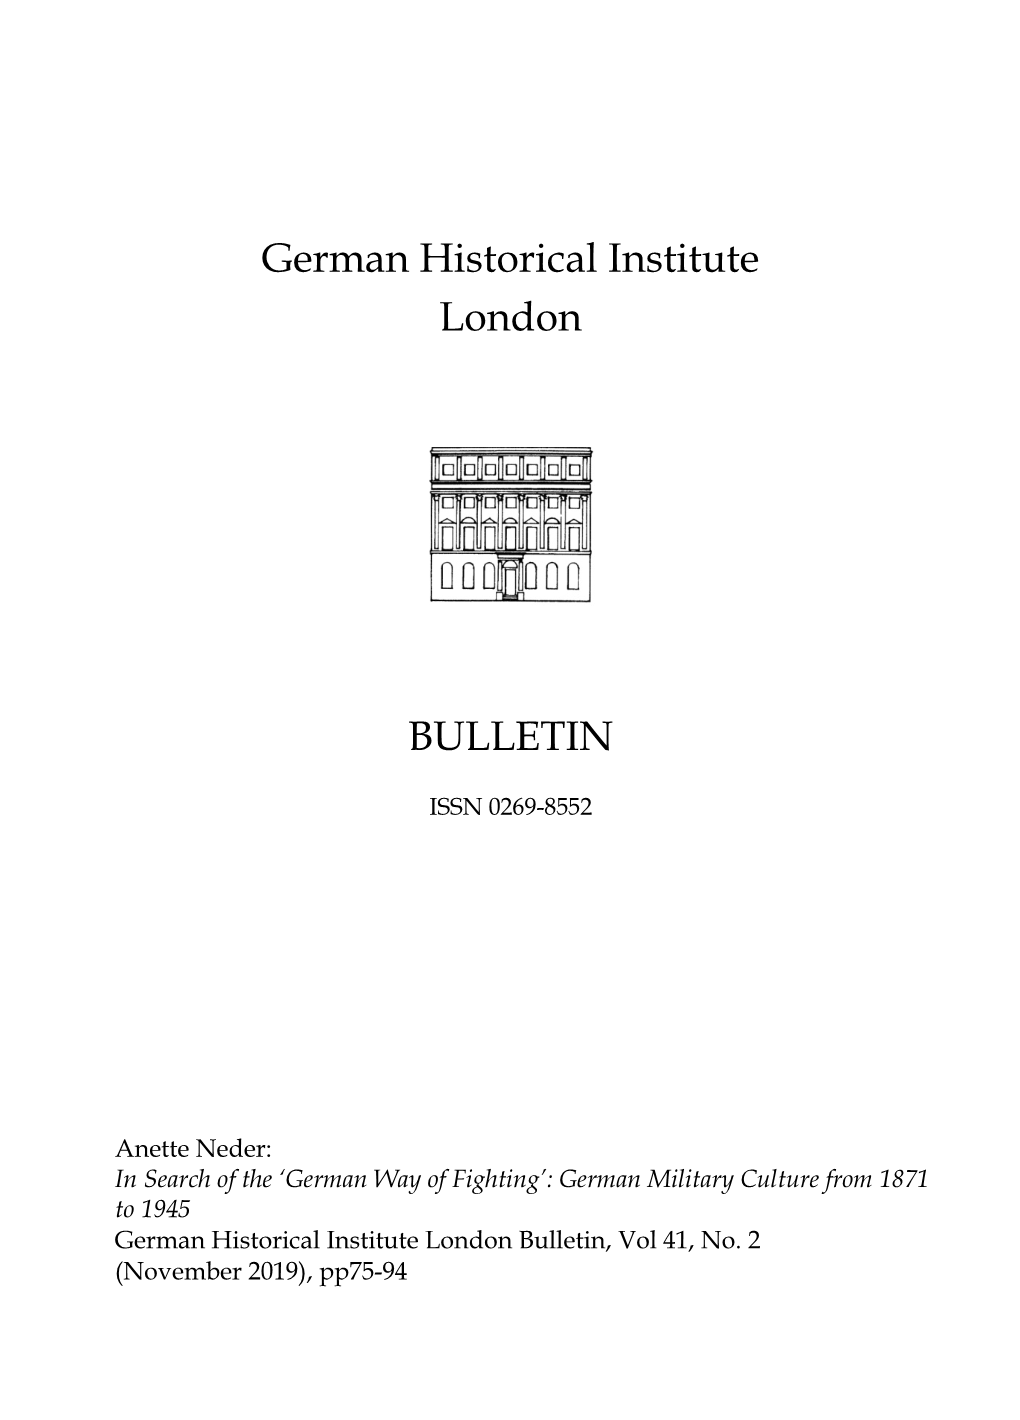 In Search of the 'German Way of Fighting': German Military Culture